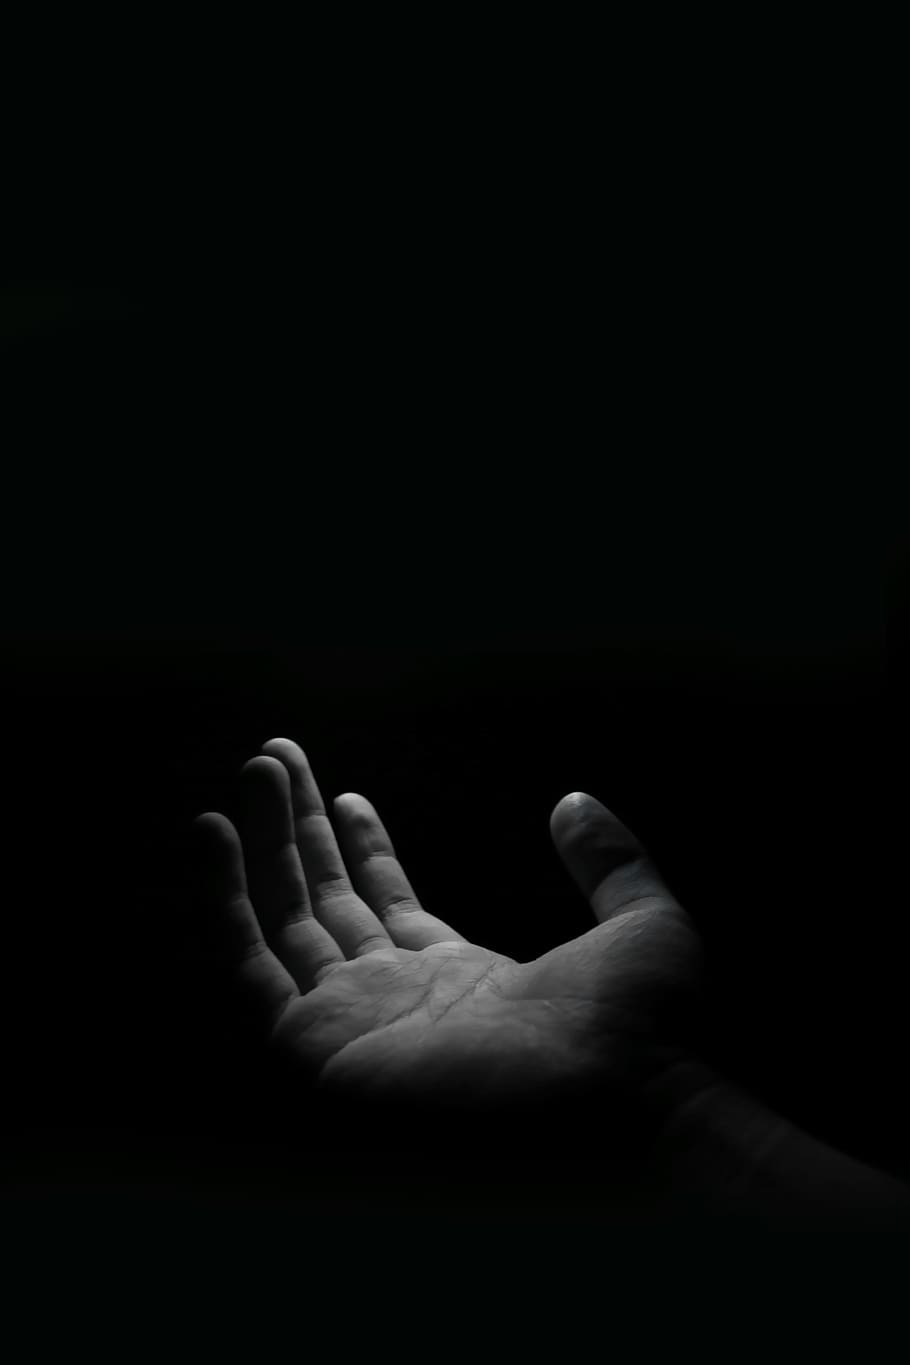 person, human, finger, hand, black and white, grayscale, hands